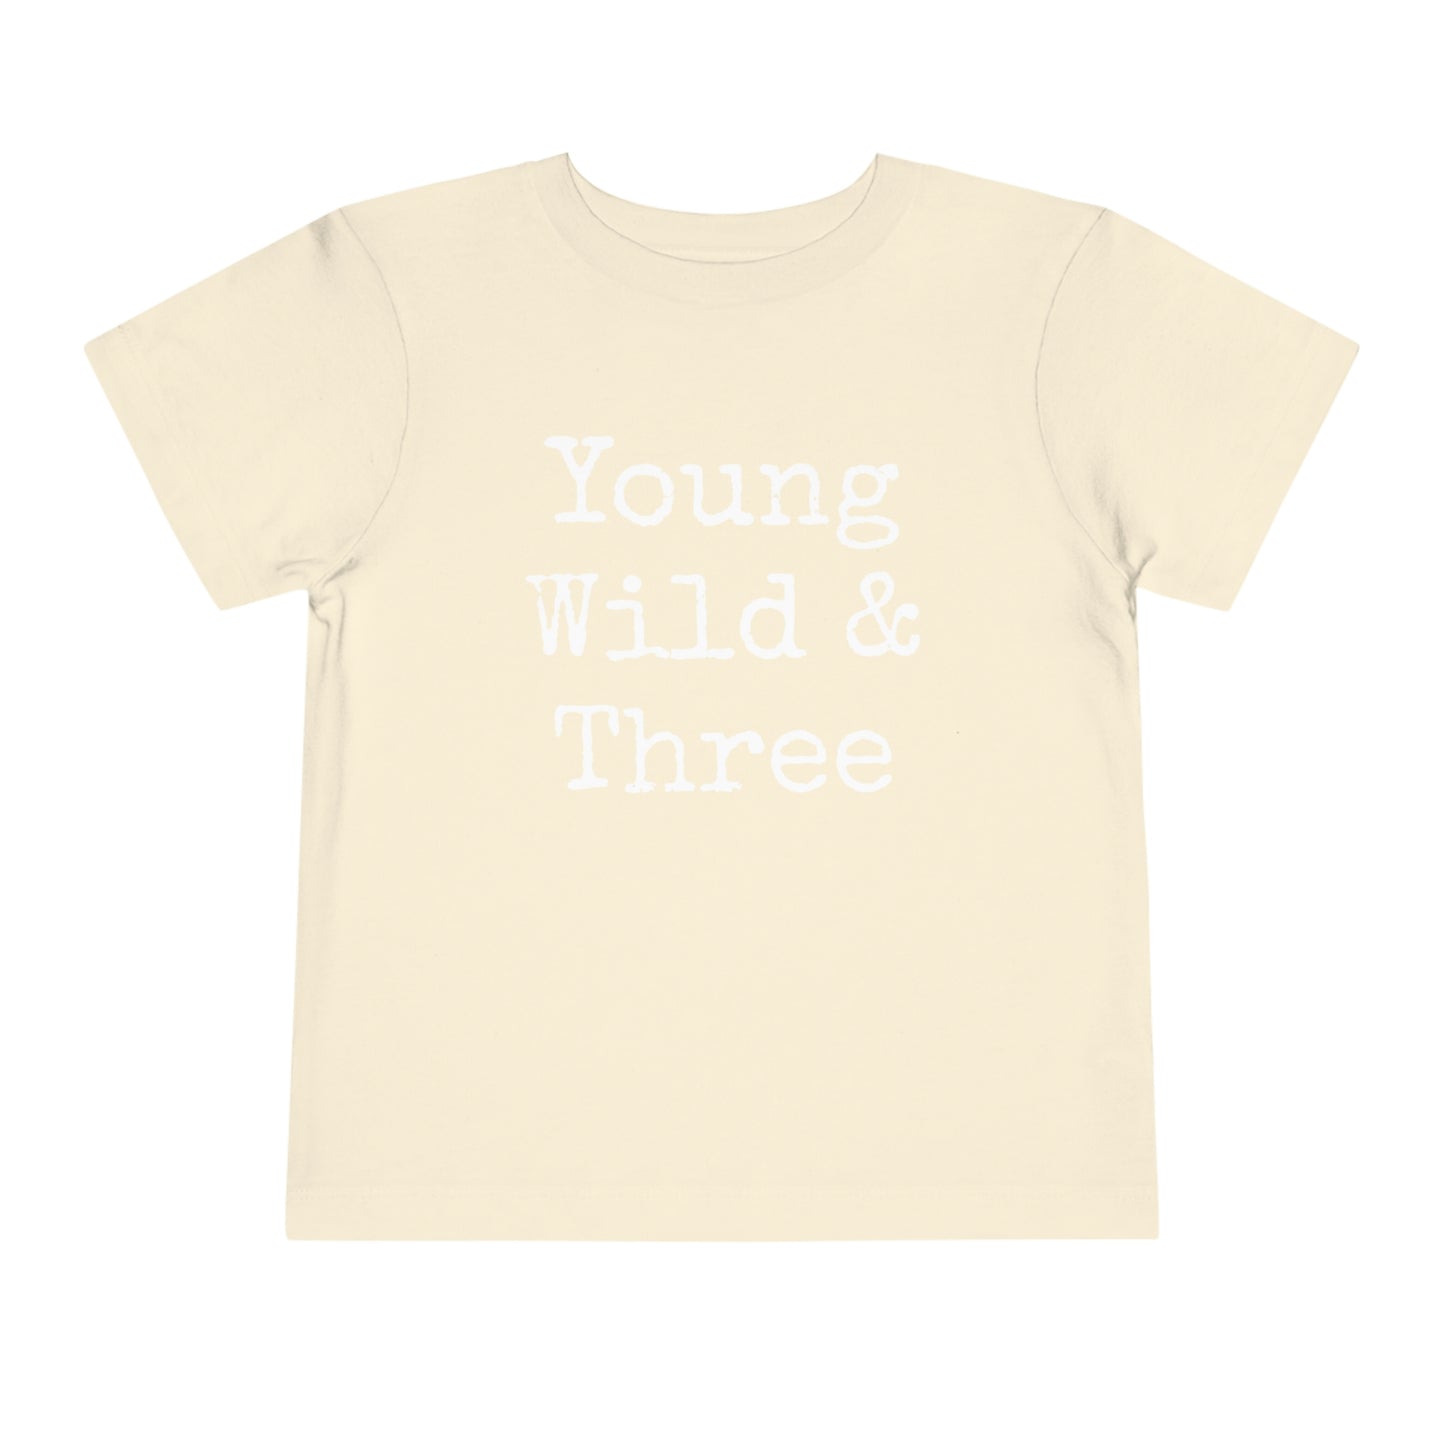 Young Wild & Three Logo Toddler Size 2T,3T,4T,5T Short Sleeve Tee